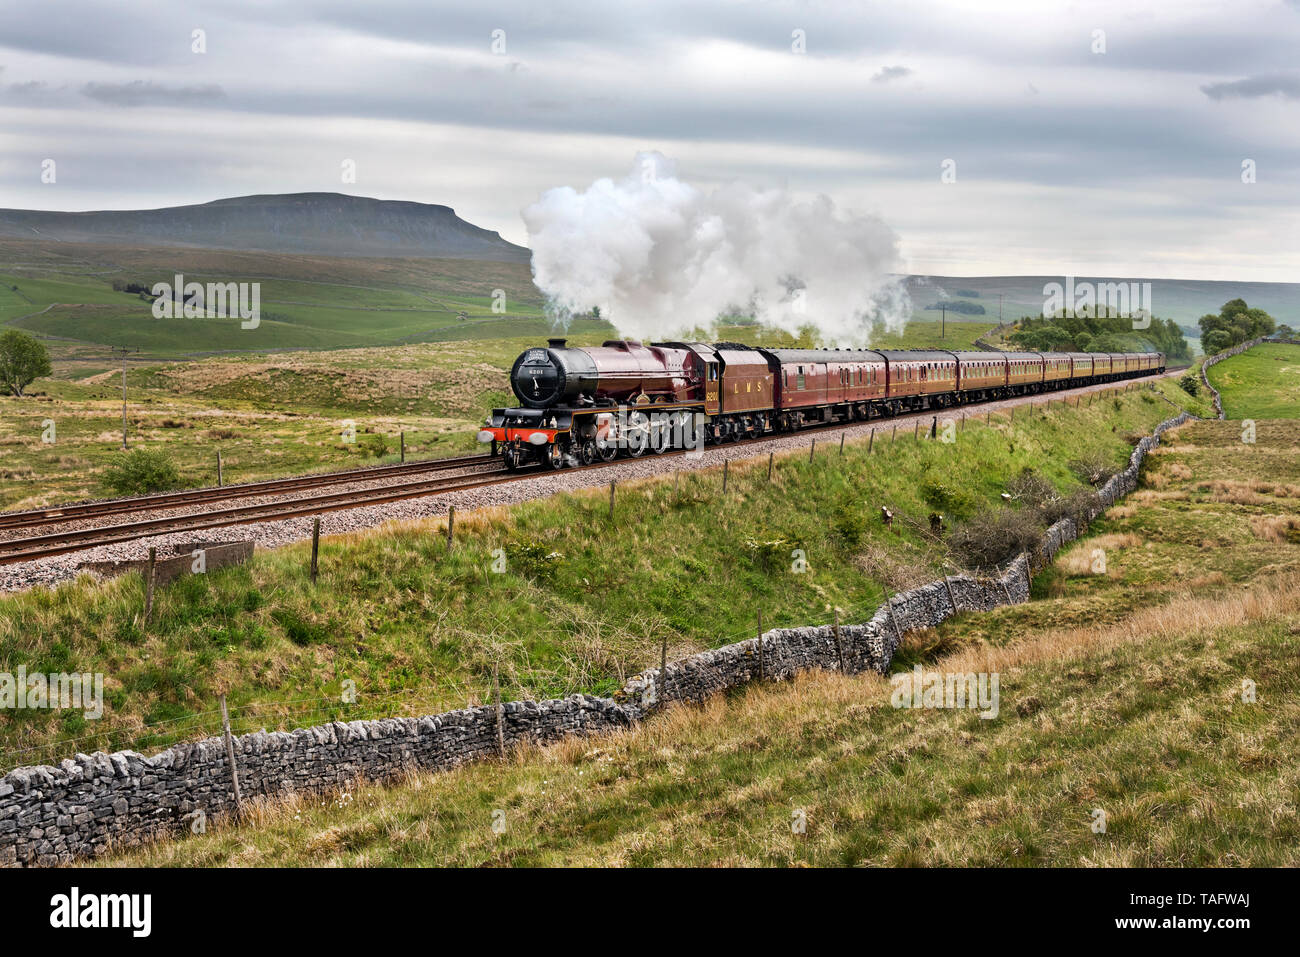 Recently restored steam locomotive Princess Elizabeth hauls 'The Pennine Limited' special over the Settle-Carlisle railway near Horton-in-Ribblesdale in the Yorkshire Dales National Park, UK. The special train ran from Norwich to Carlisle and return, with steam haulage over the section between Hellifield and Carlisle. Pen-y-ghent, one of the Yorkshire Three Peaks is seen in the background. Stock Photo